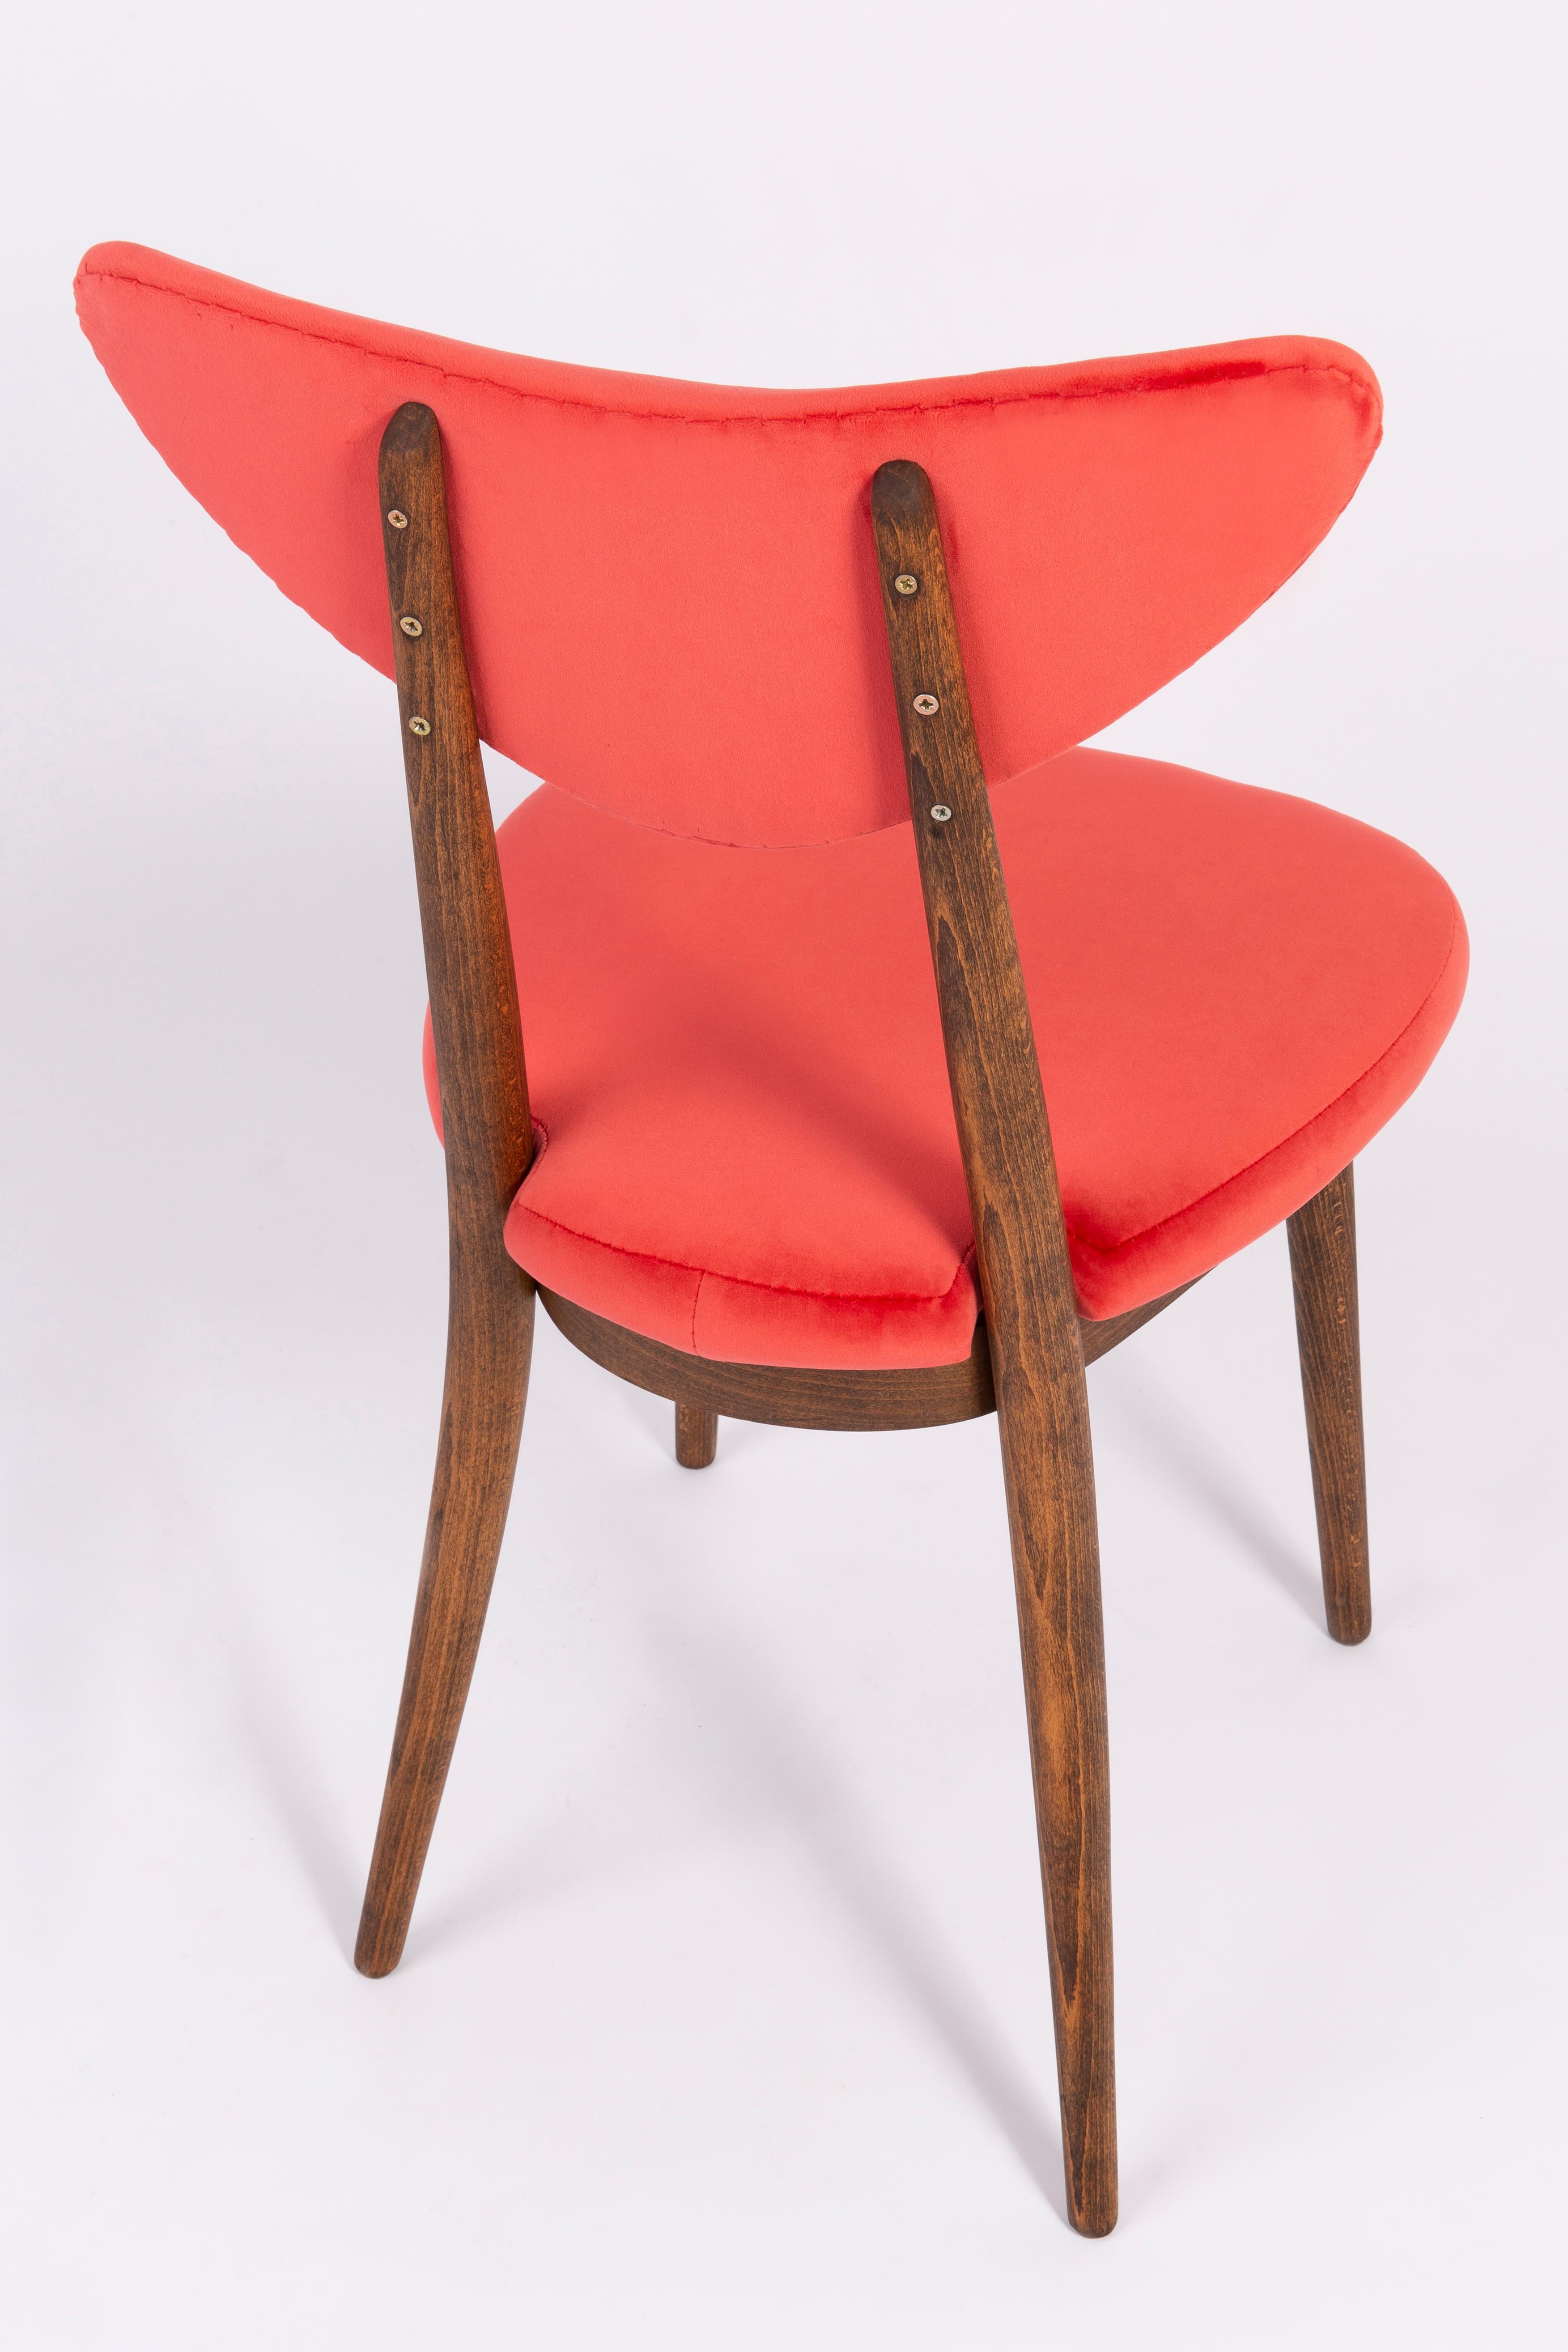 Set of Two Red Heart Chairs, Poland, 1960s For Sale 1